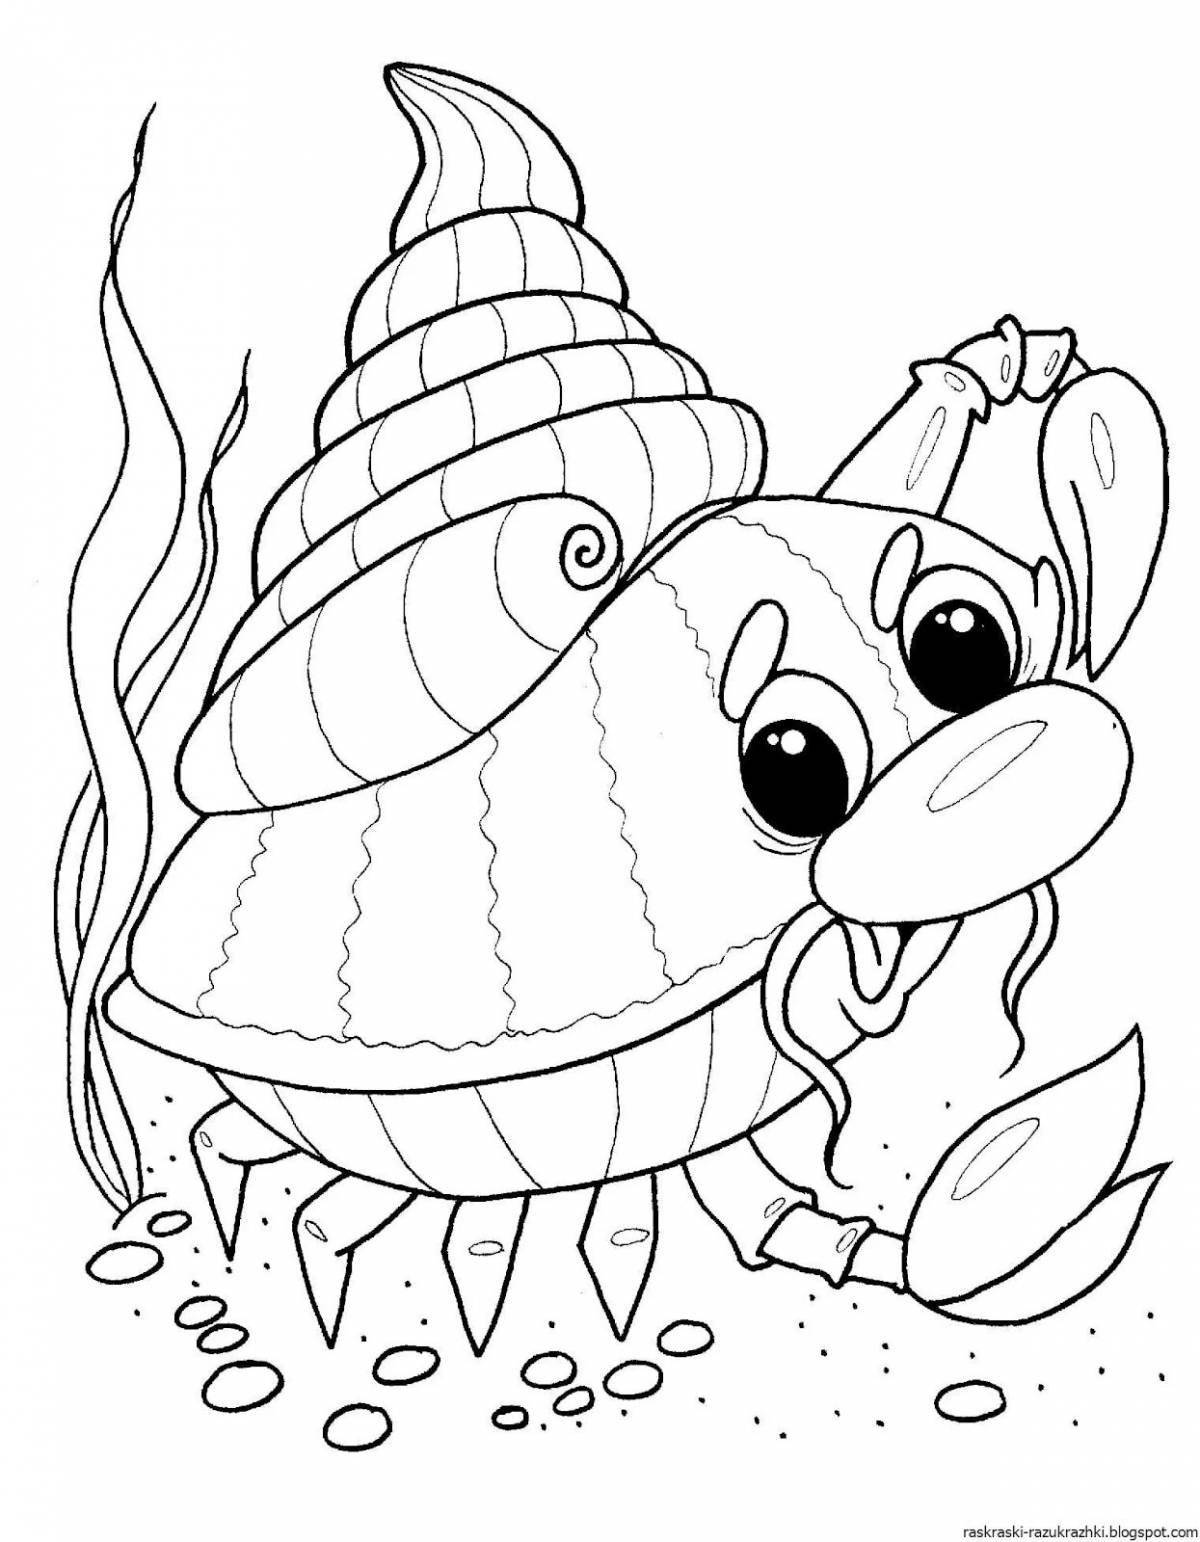 Cute sea animals coloring pages for kids